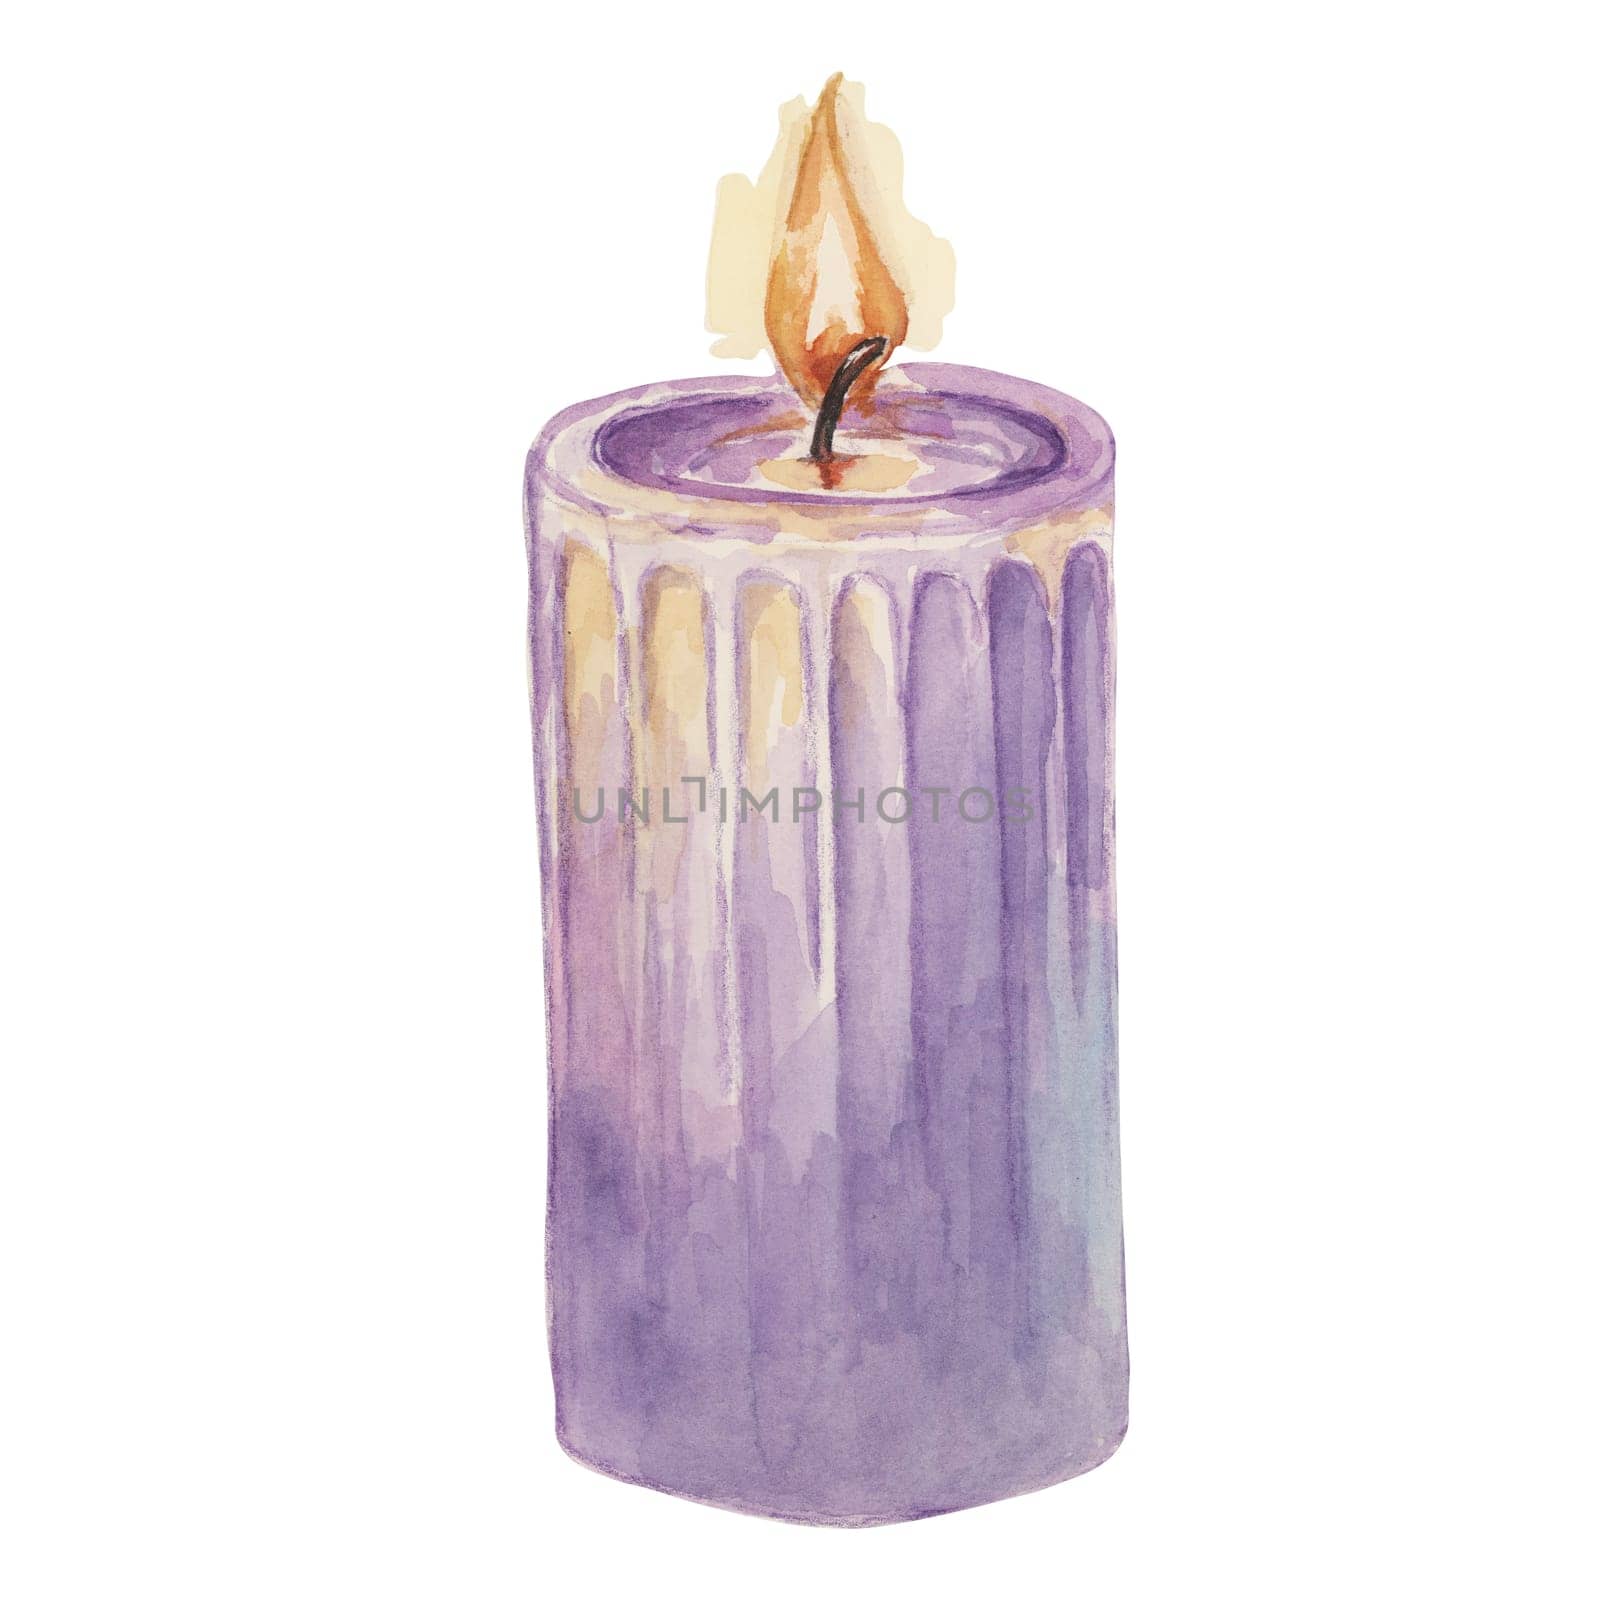 Purple wax candle for home fragrance. Home spa lavender aromatherapy watercolor illustration. Hand drawn clipart for beauty, cosmetics, wellness by Fofito